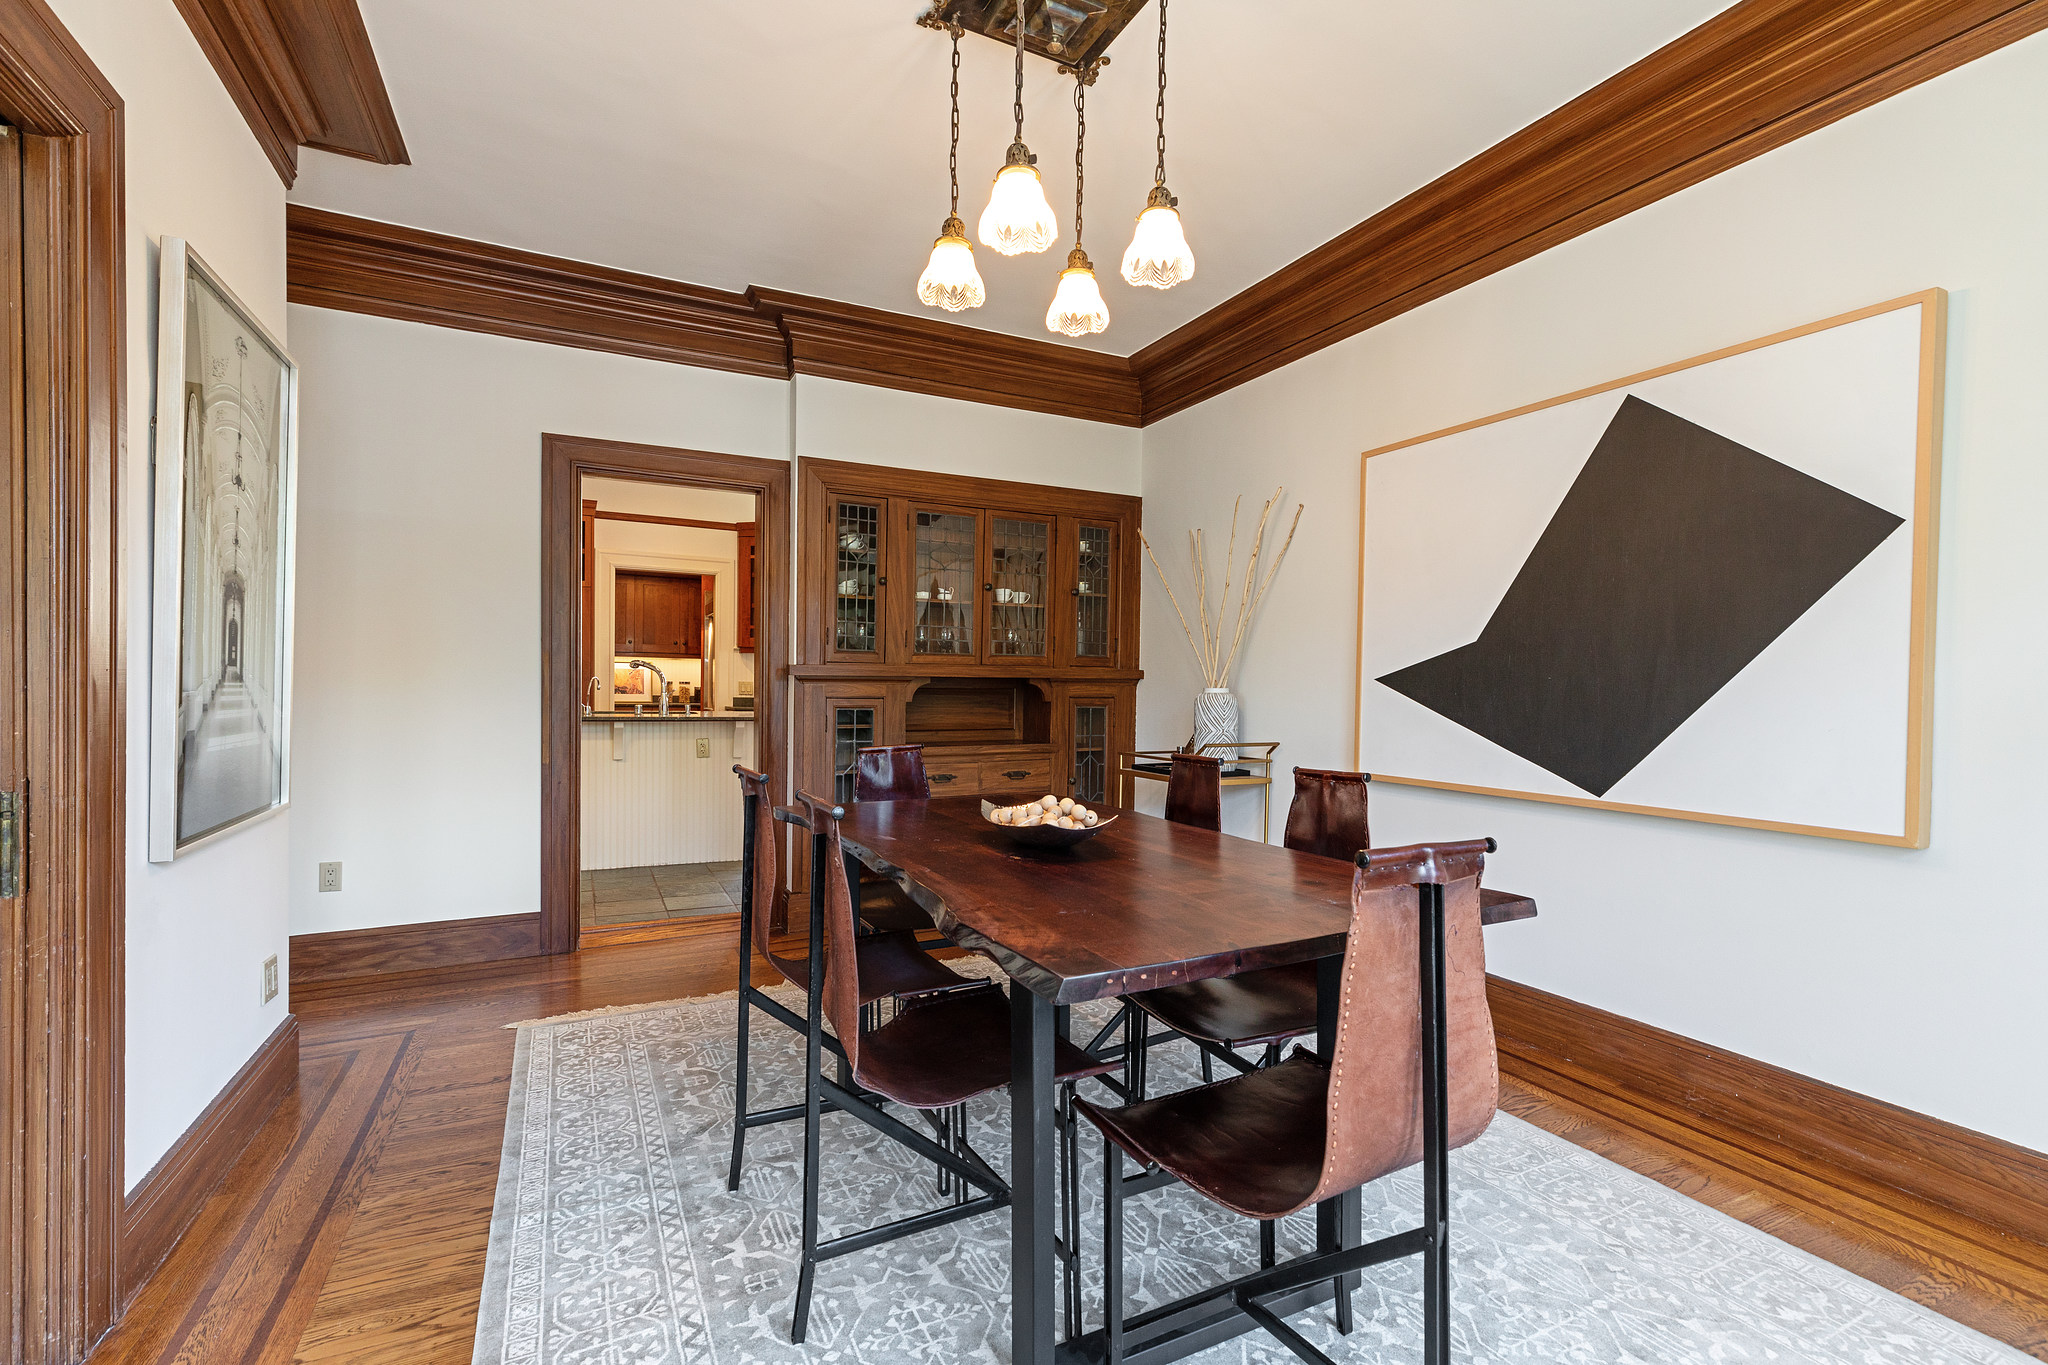 Property Photo: Dining room, featuring a fireplace